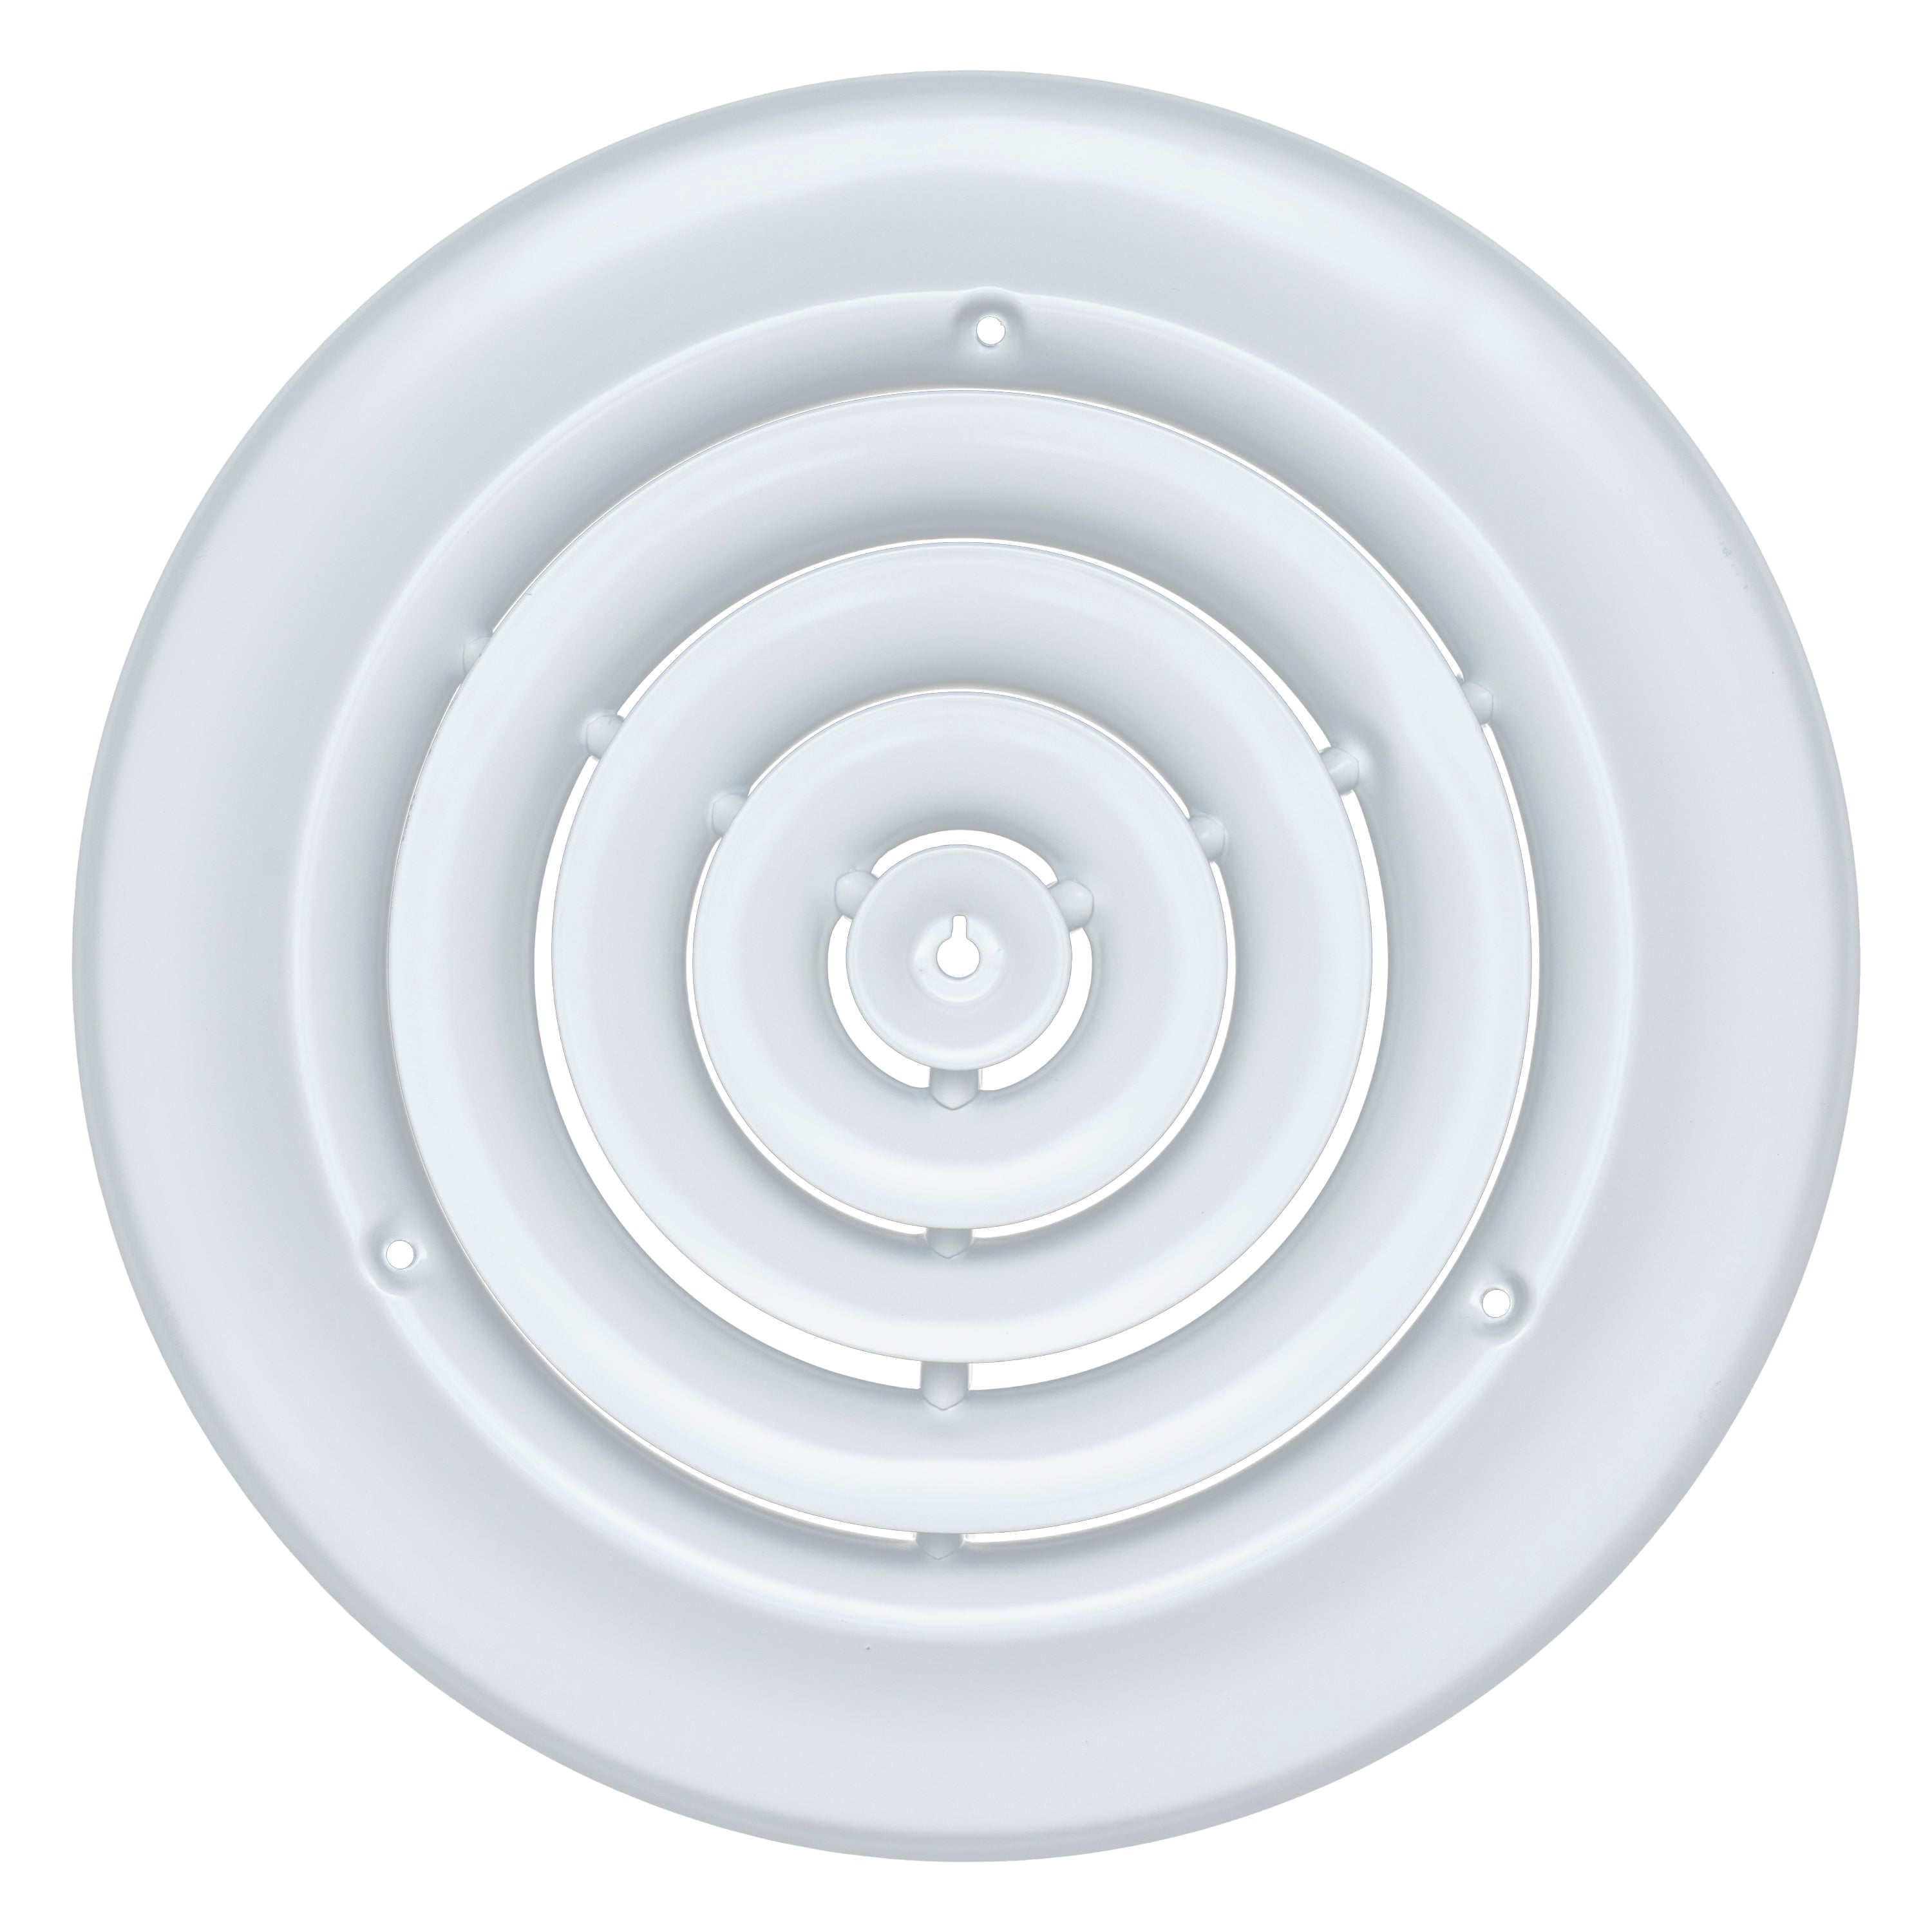 Handua 8" [Neck Size] Steel Round Air Supply Diffuser for Ceiling - White - Outer Dimension: 11-15/16"